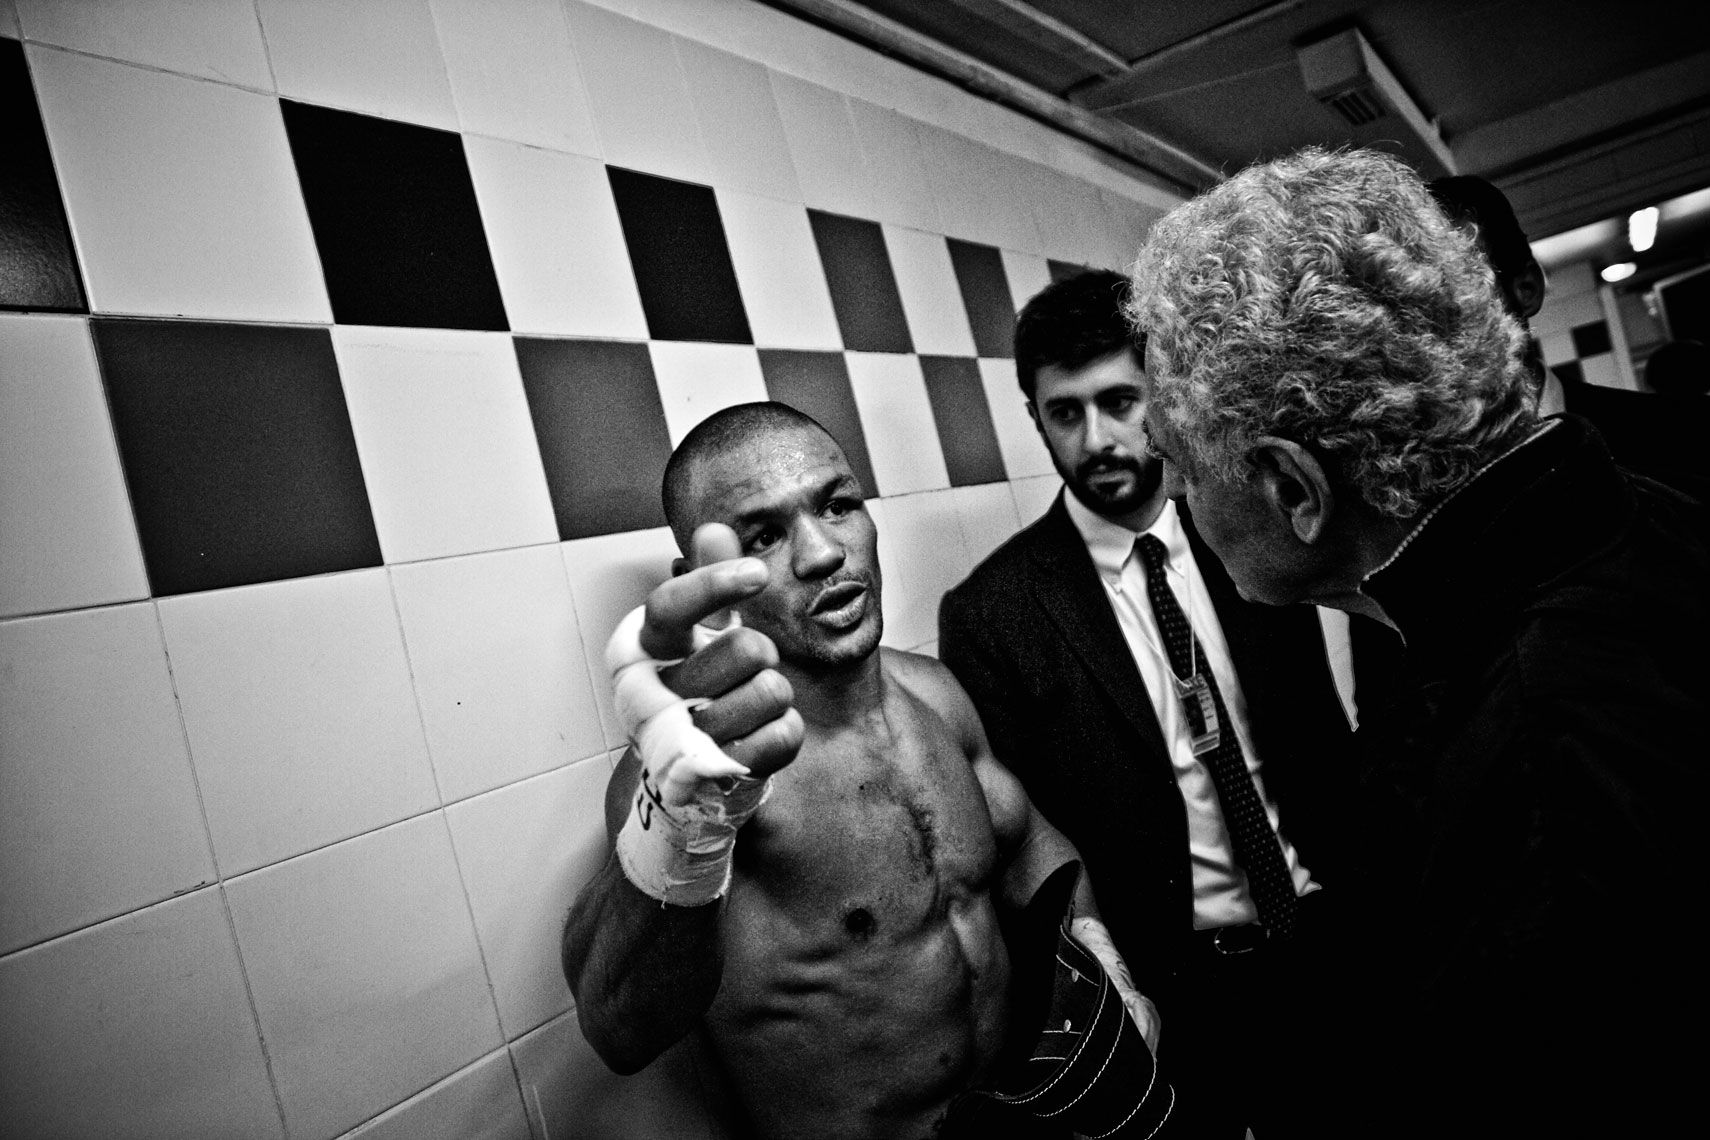 ITALY. Florence, 4th November 2011. Mandela Forum, the night of the match for the EBU (European Boxing Union) Welter Weight crown. After the victory. Leonard Bundu answering to some questions about the strategy that he adopted during the match.